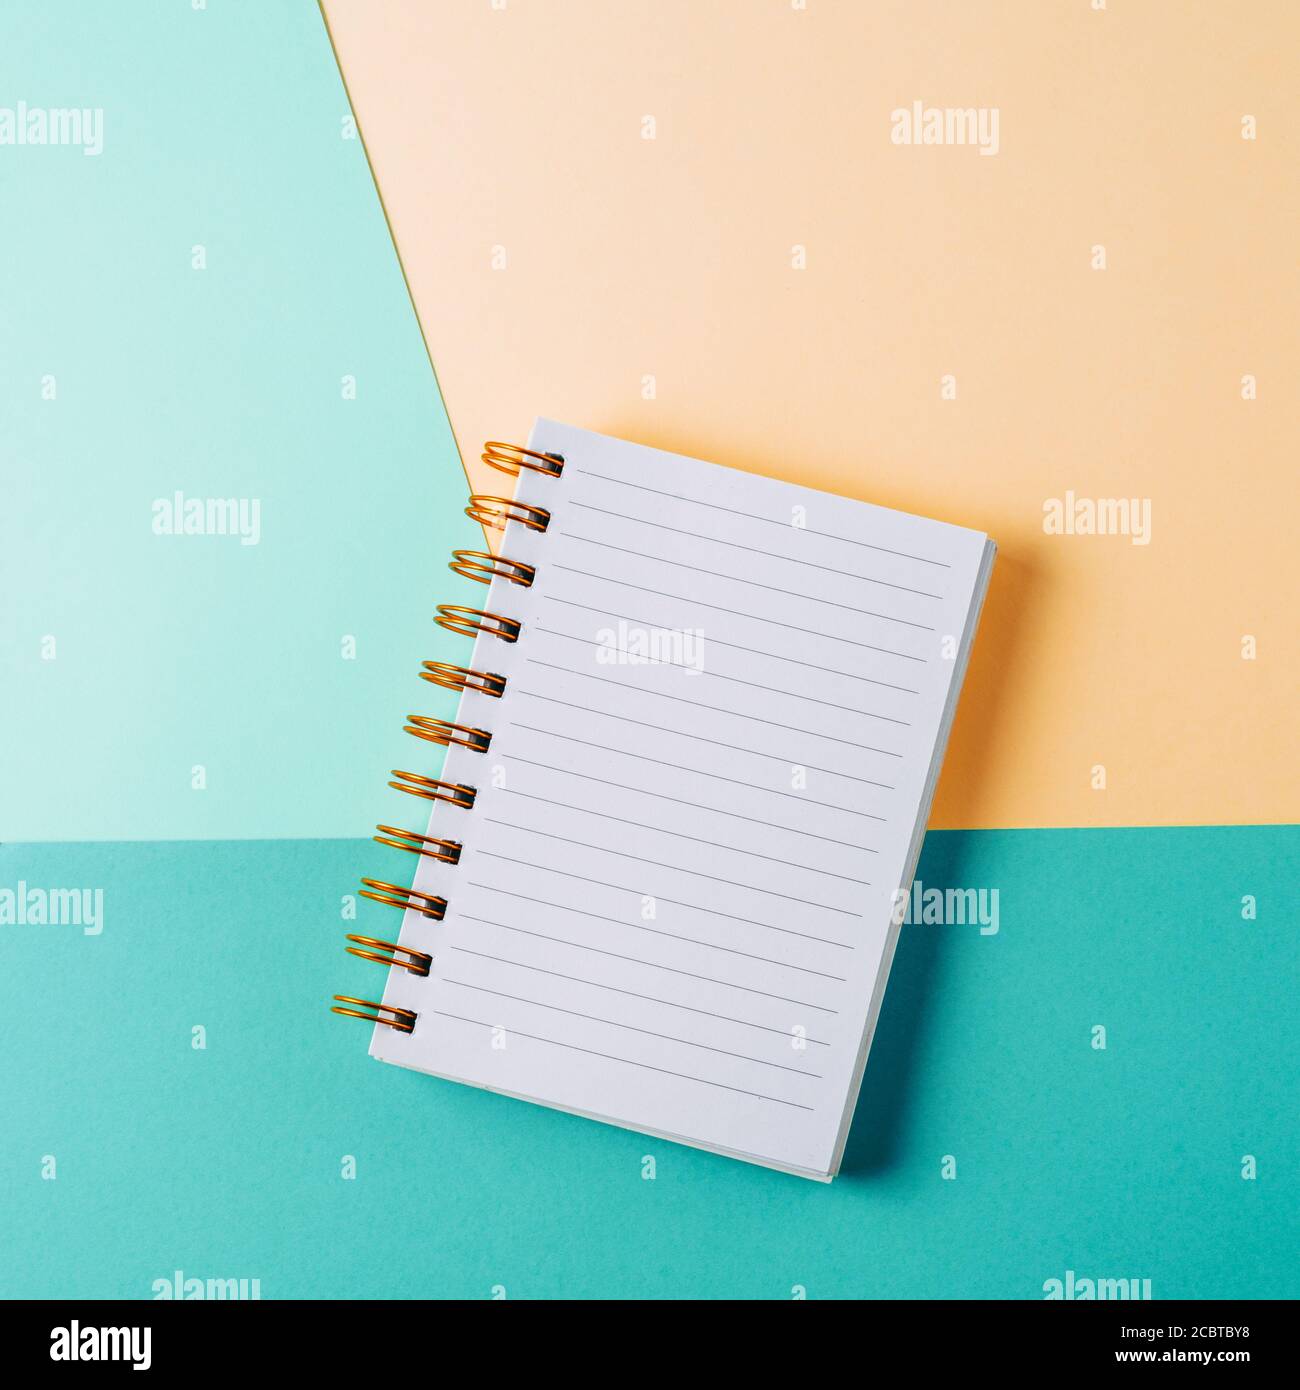 Open notebook with blank sheet and golden spiral on a colorful pastel background. The concept of education, writing down ideas, plans. Place for text. Stock Photo